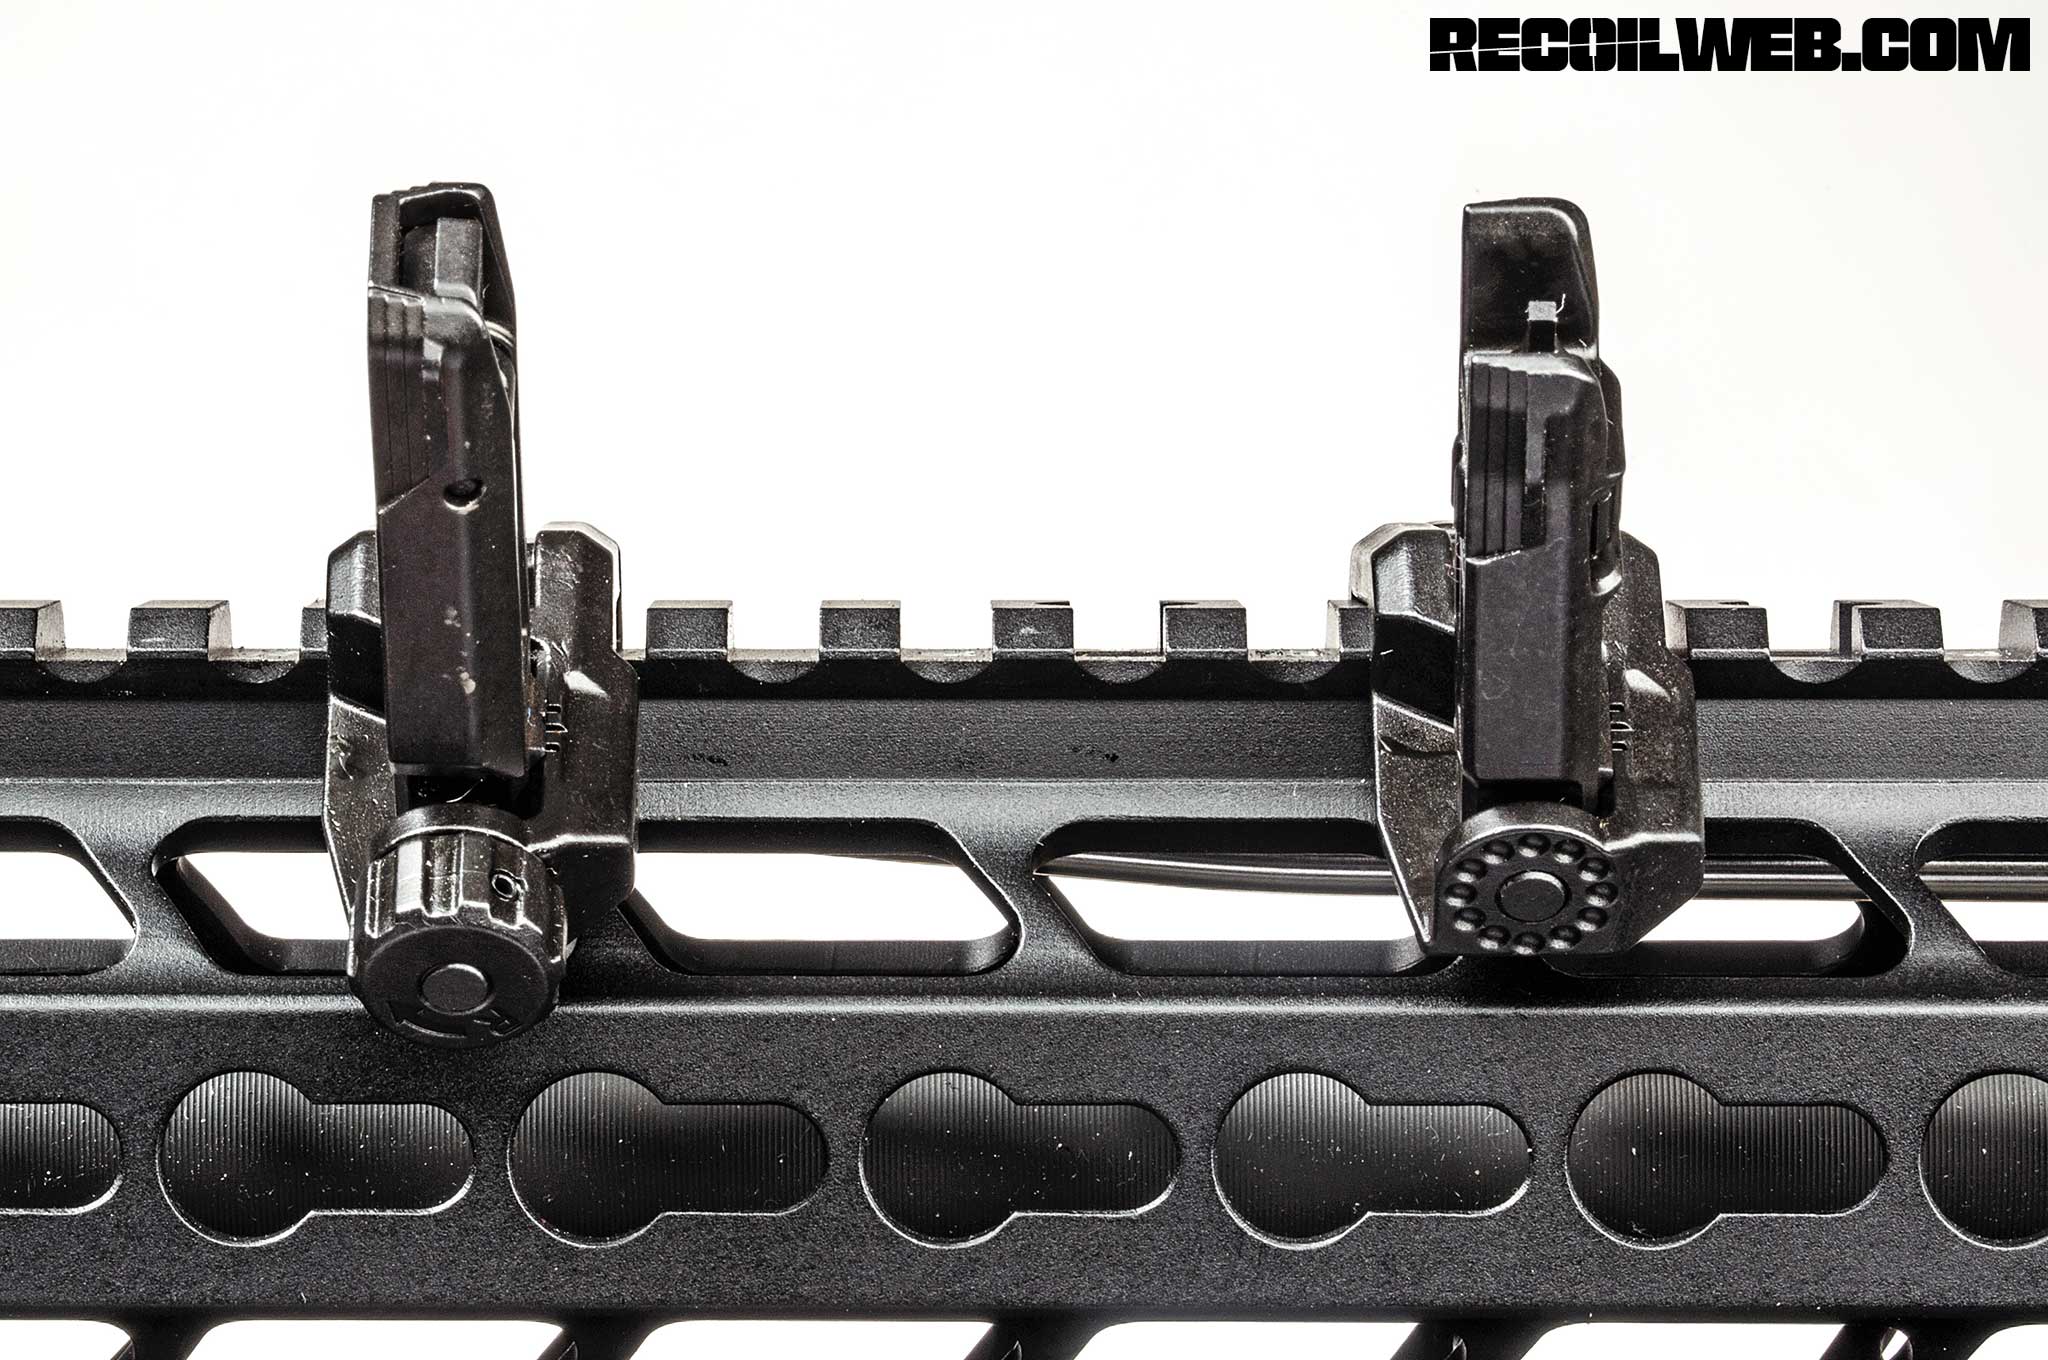 back-up-iron-sights-buyers-guide-magpul-mbus-pro-offset-sights-003.